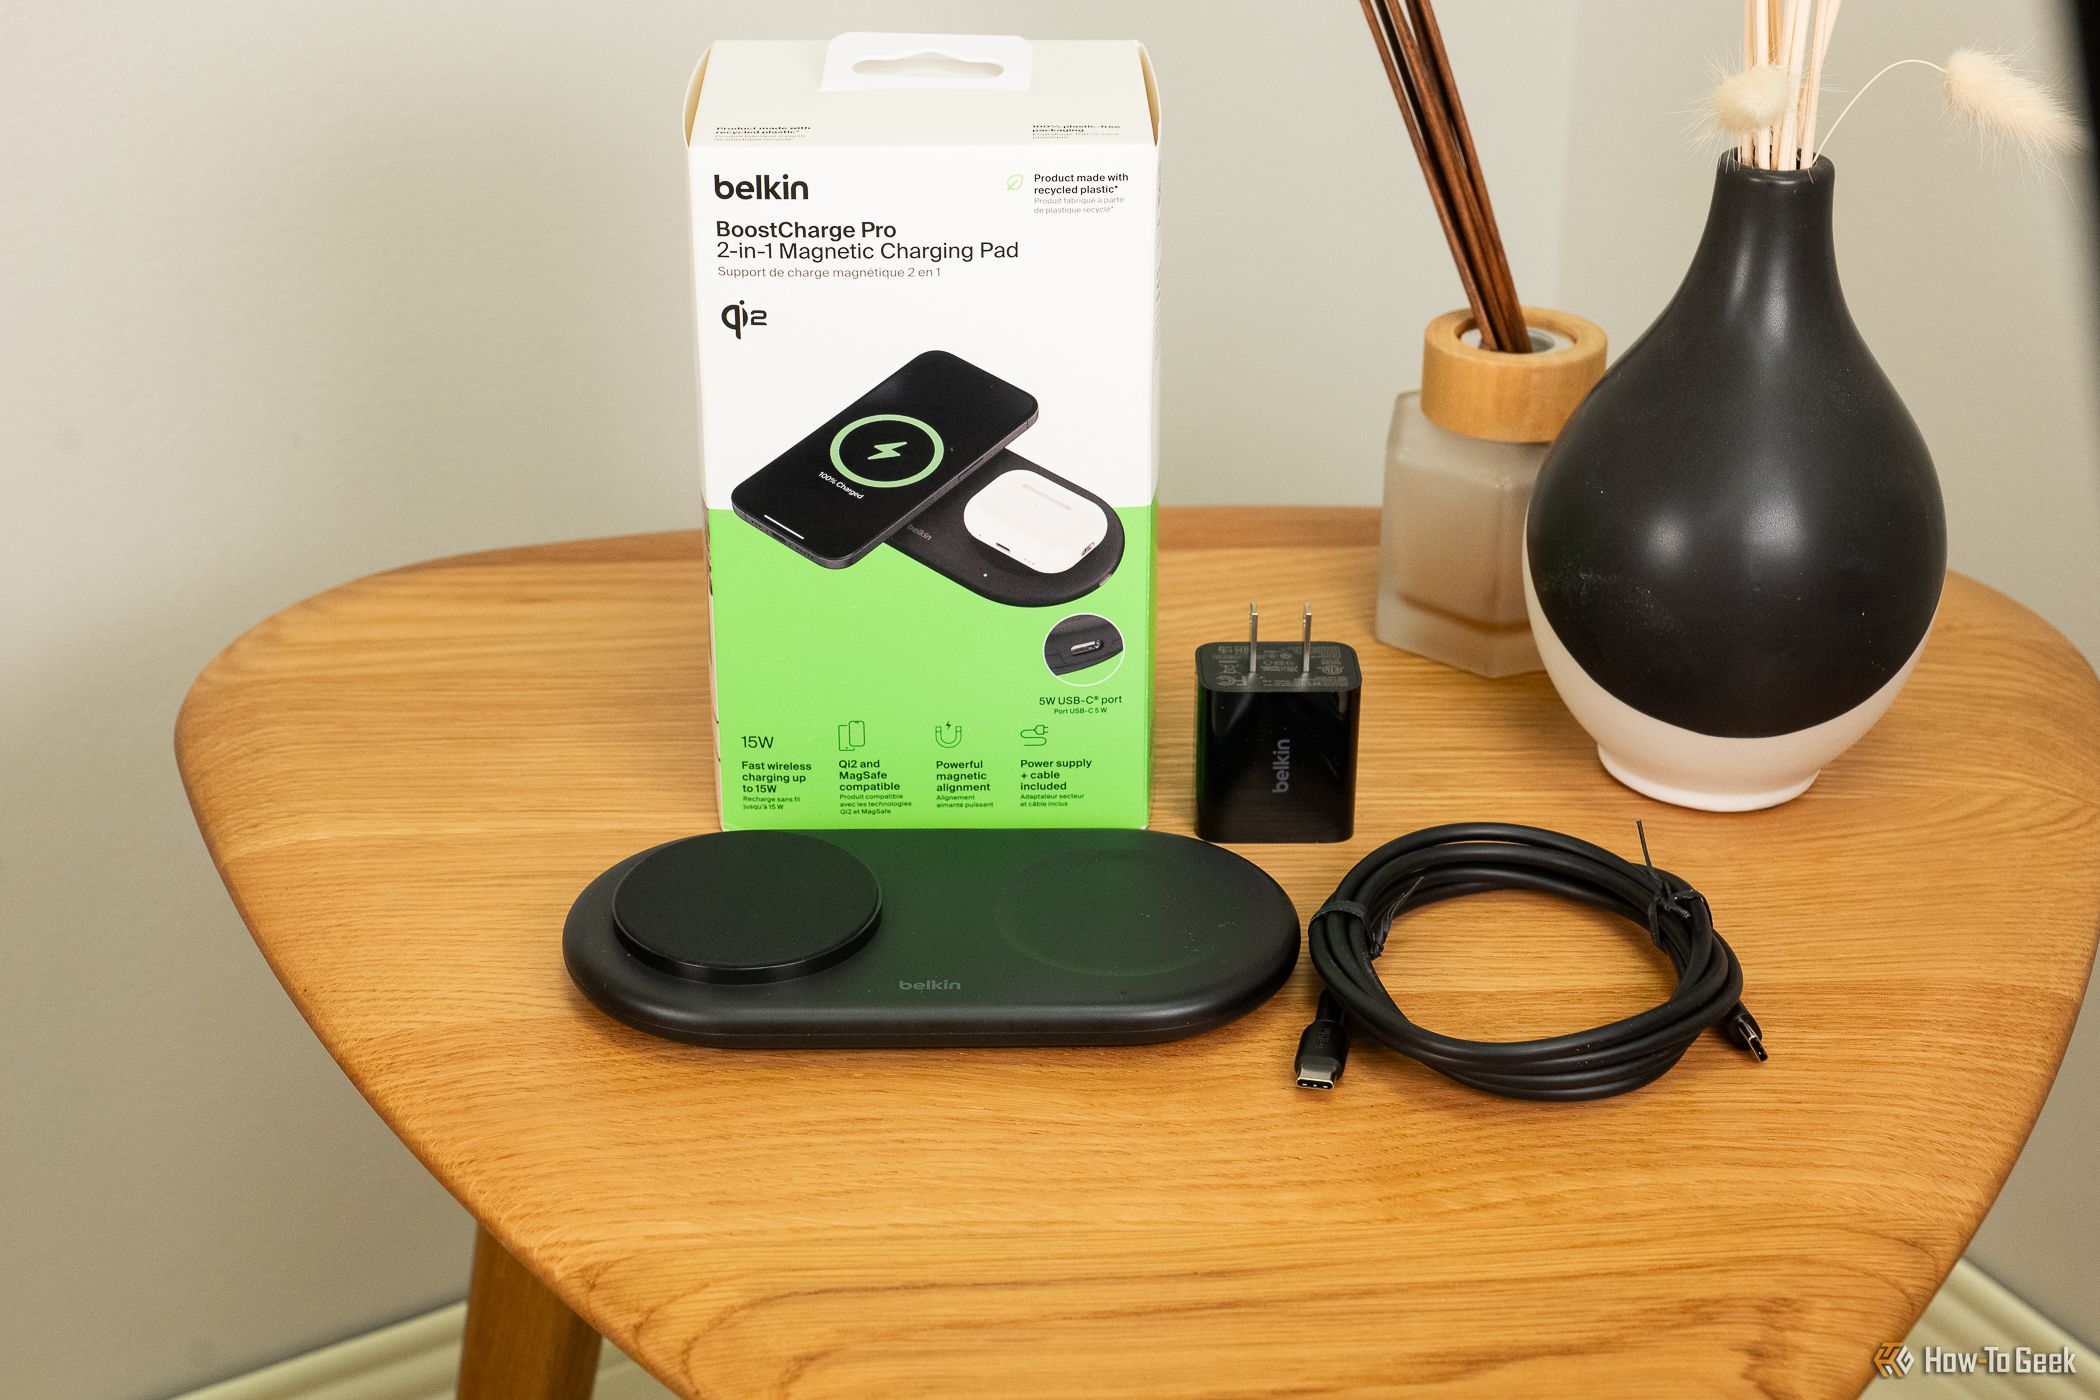 Belkin BoostCharge Pro 2-in-1 Magnetic Wireless Charging Pad with Qi2 box, charger, and cable